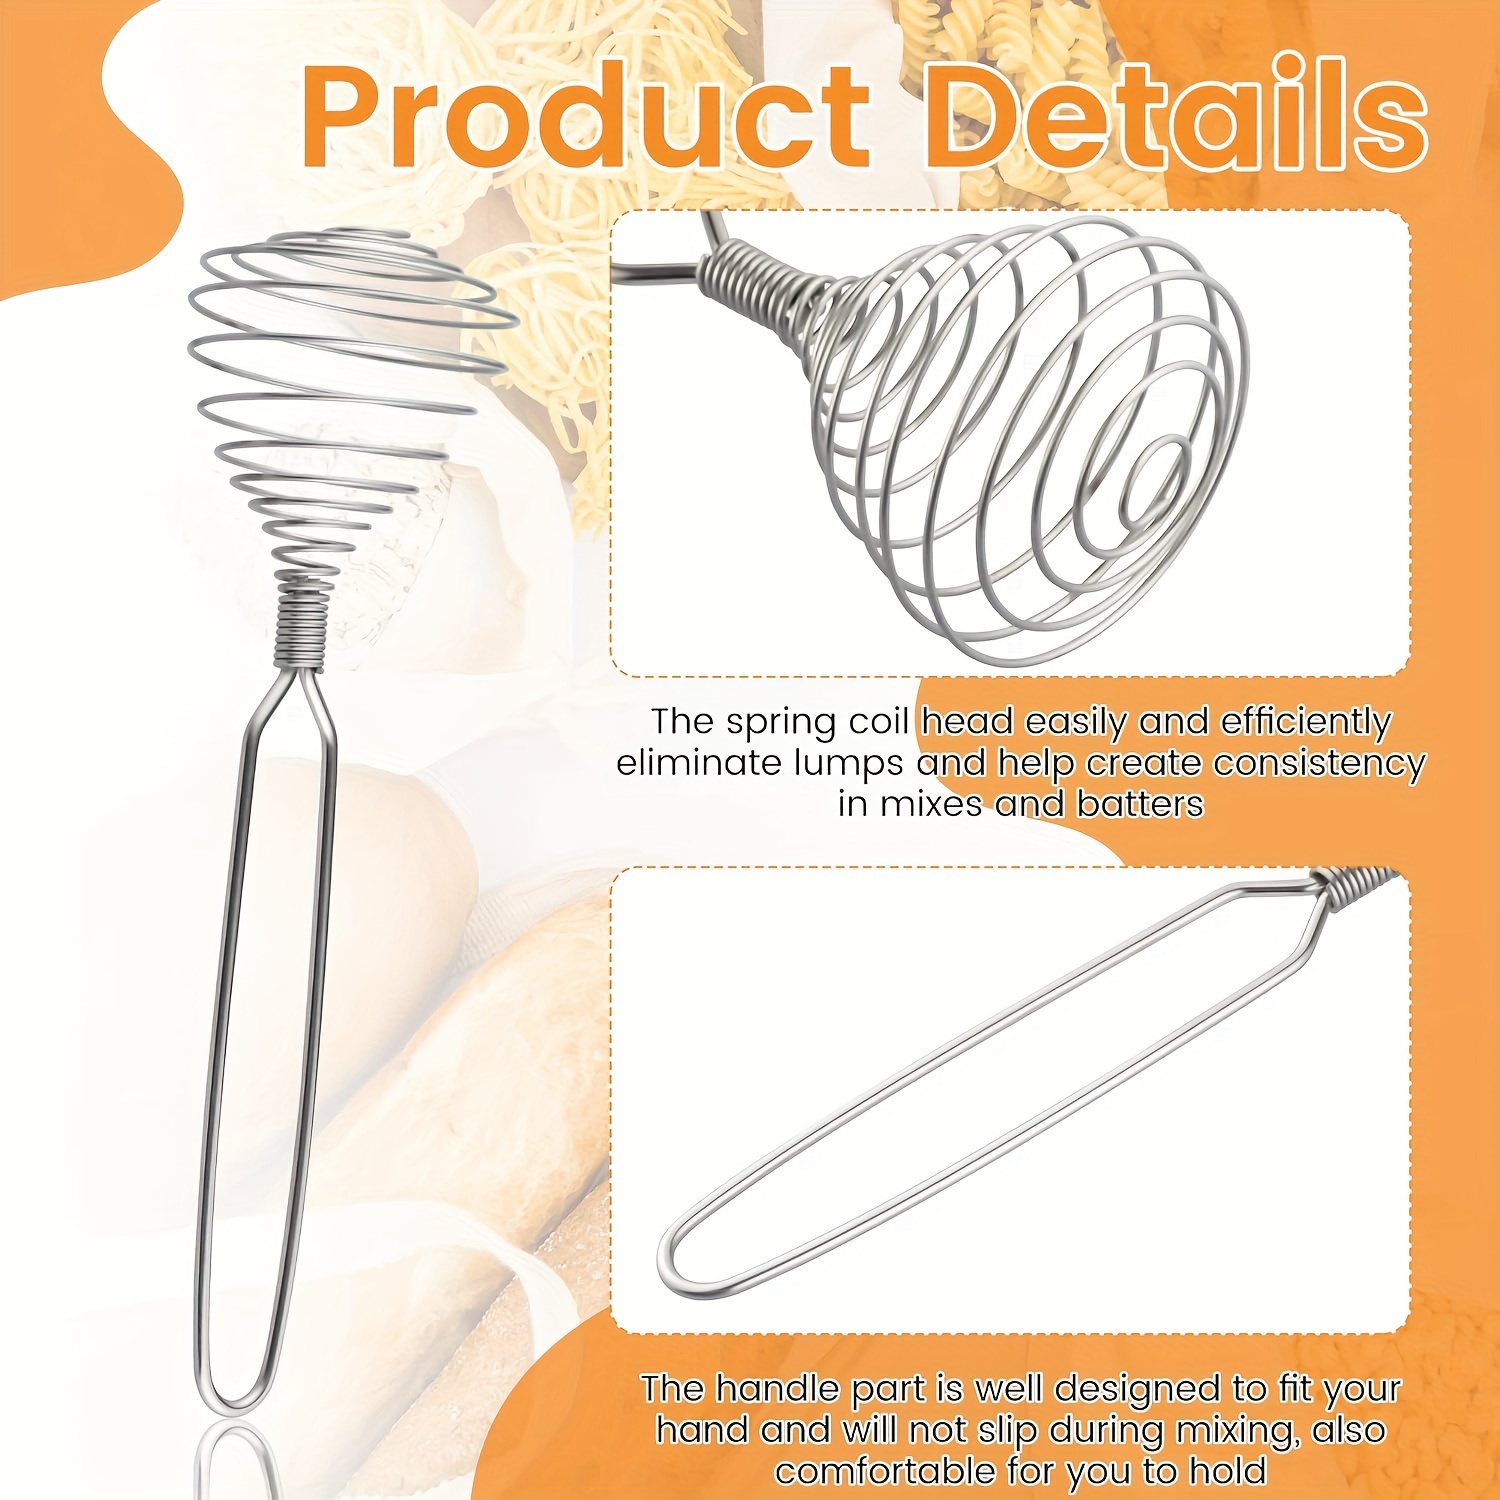  Peanut Butter Stirrer and Mixer Tool, Nut Butter Mixer, Peanut  Butter Stirrer, Peanut Butter Mixer, Jam Stirring Tools, Stainless Steel  Material for Kitchen (1Pcs) : Home & Kitchen